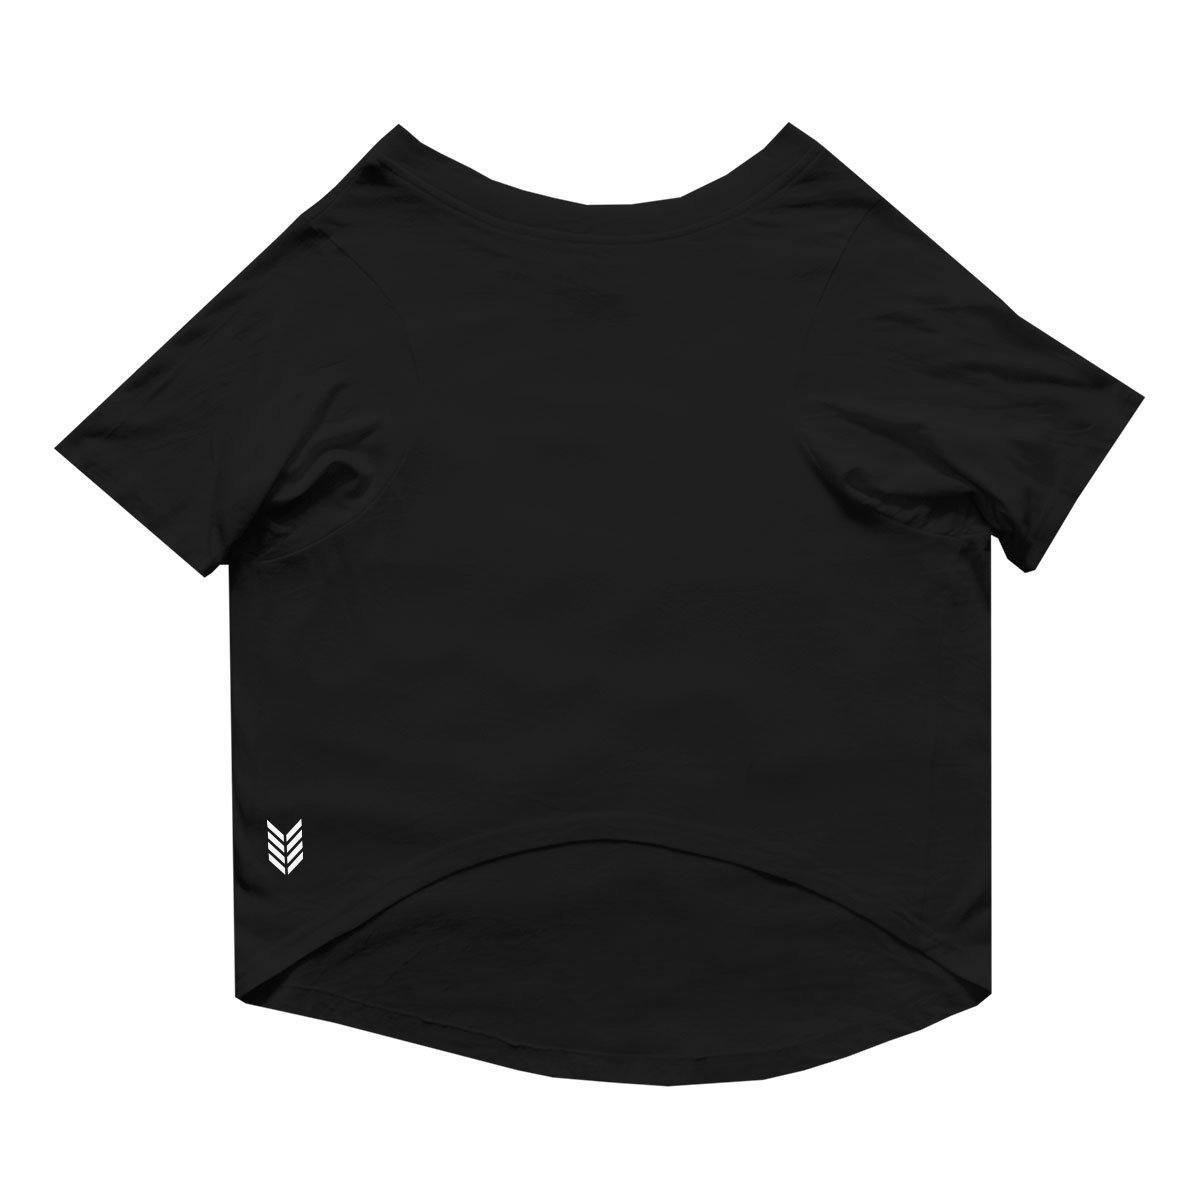 Ruse XX-Small (Chihuahuas, Papillons) / Black Customize Basic Crew Neck Solid Half Sleeves Dog Tee